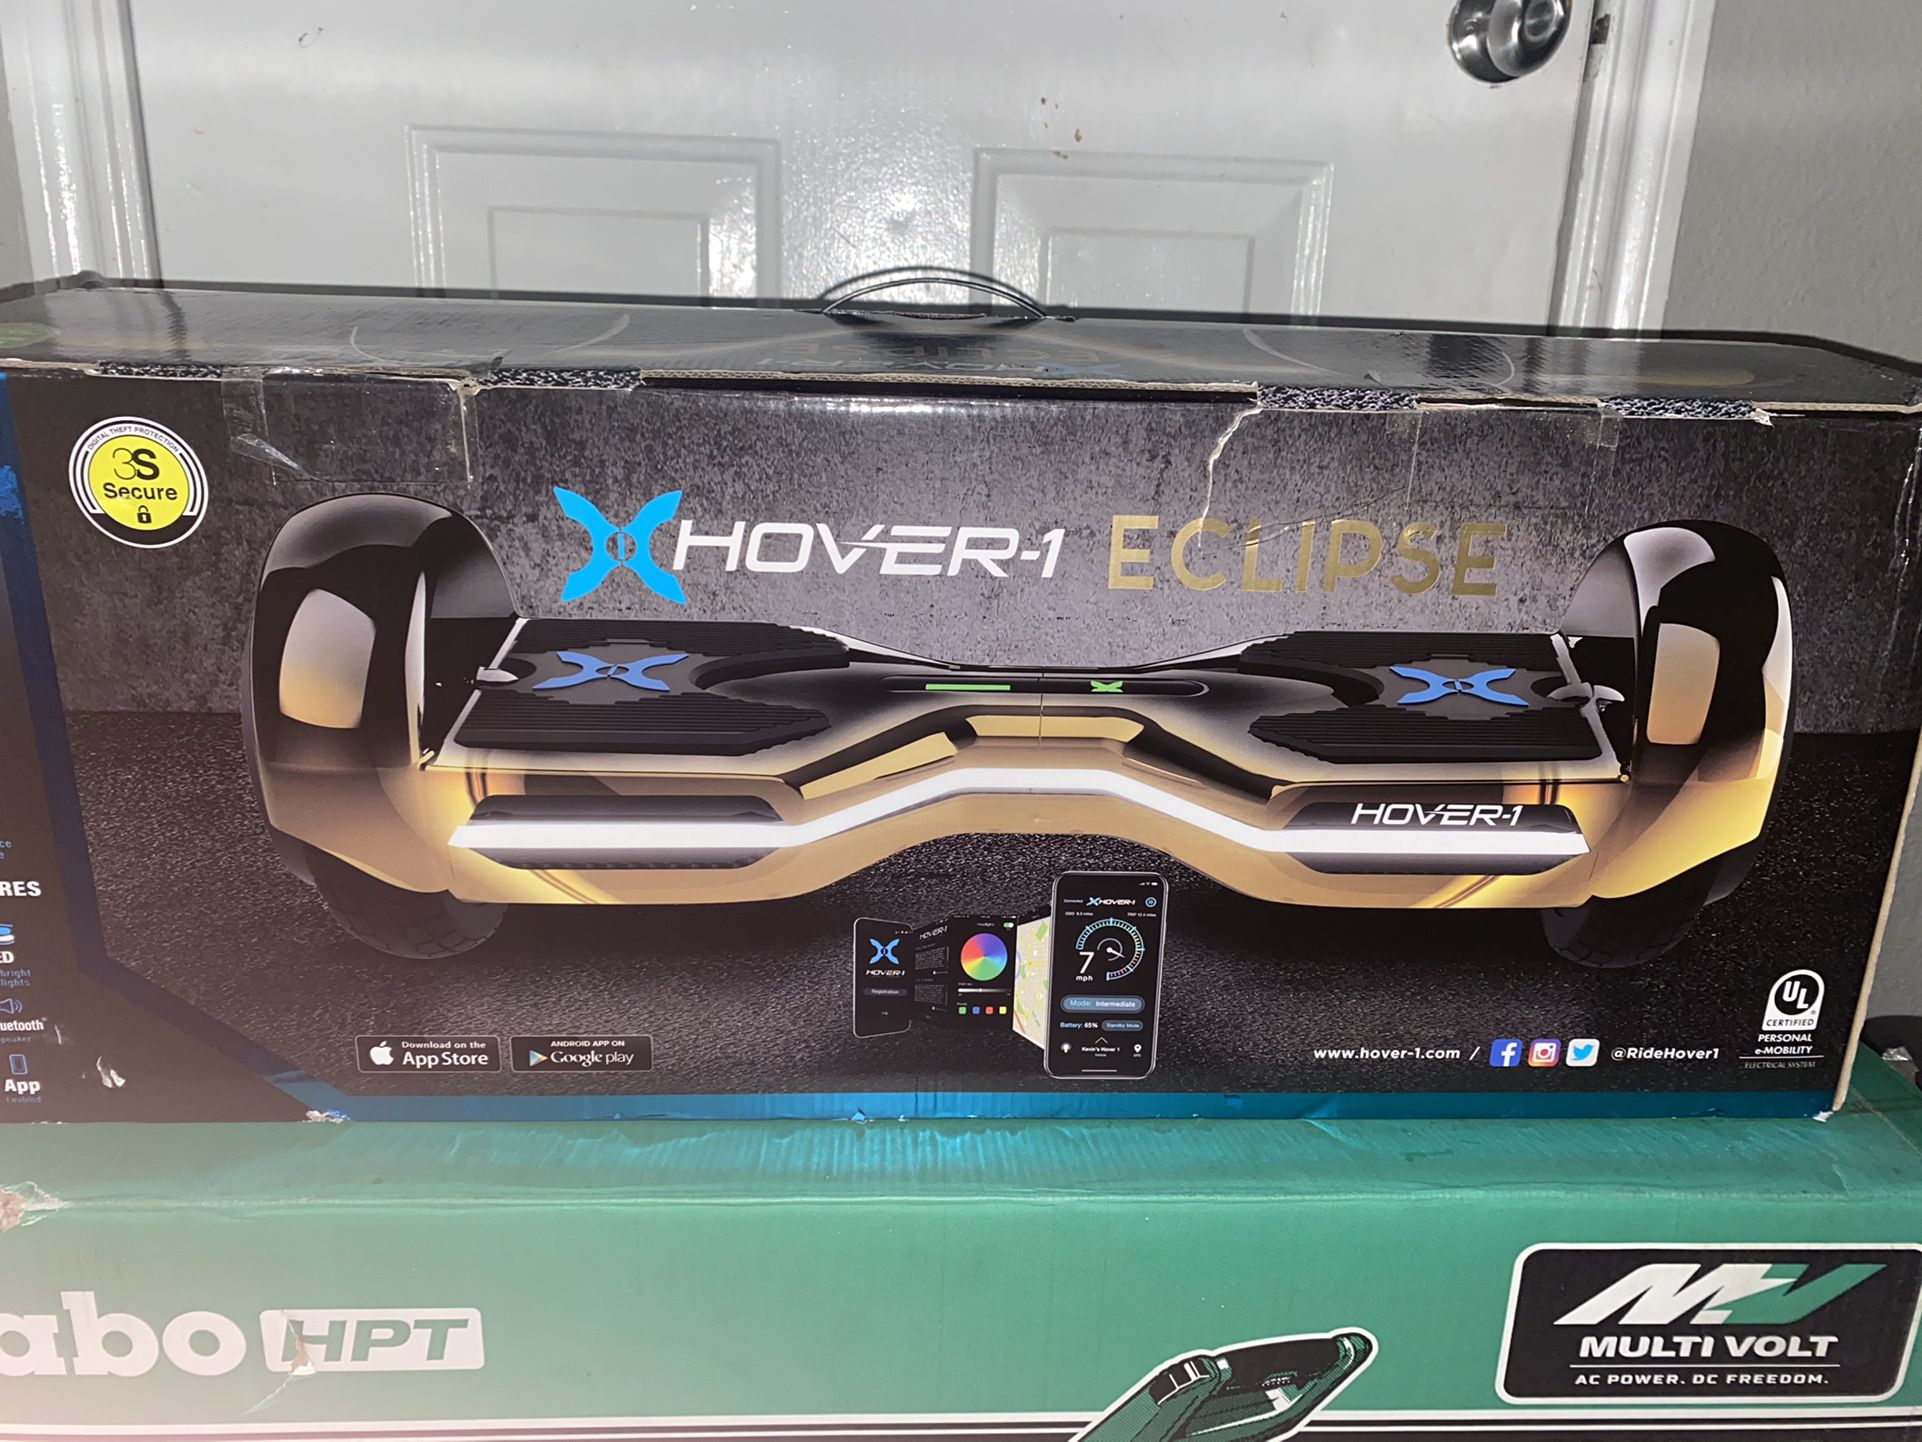 Hover-1 Eclipse Hoverboard w/ 8 in Wheels, Ultrabright Customizable LED Headlights, Built-In Bluetooth Speaker, 4-Hour Charge Time, 7 MPH Max Speed - 